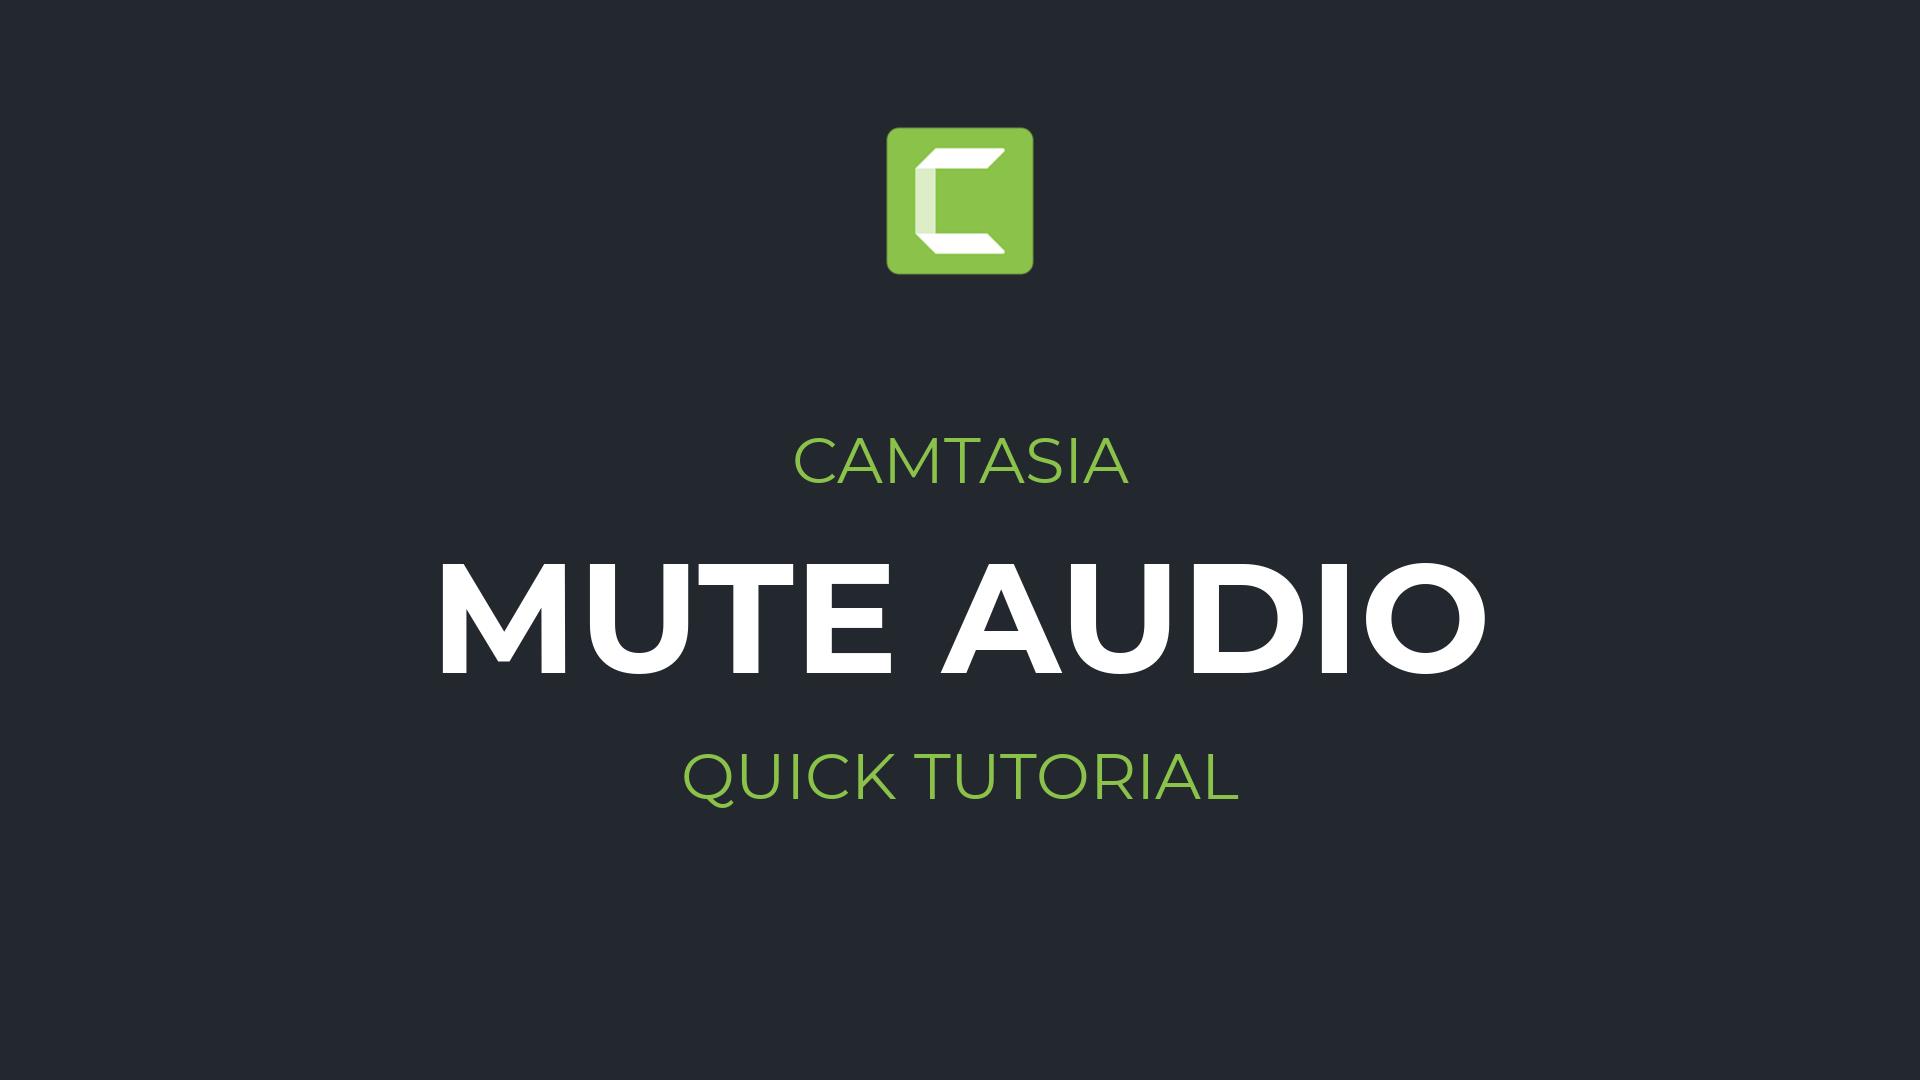 How to mute audio in Camtasia | Camtasia Silence Audio Tutorial for Absolute Beginners